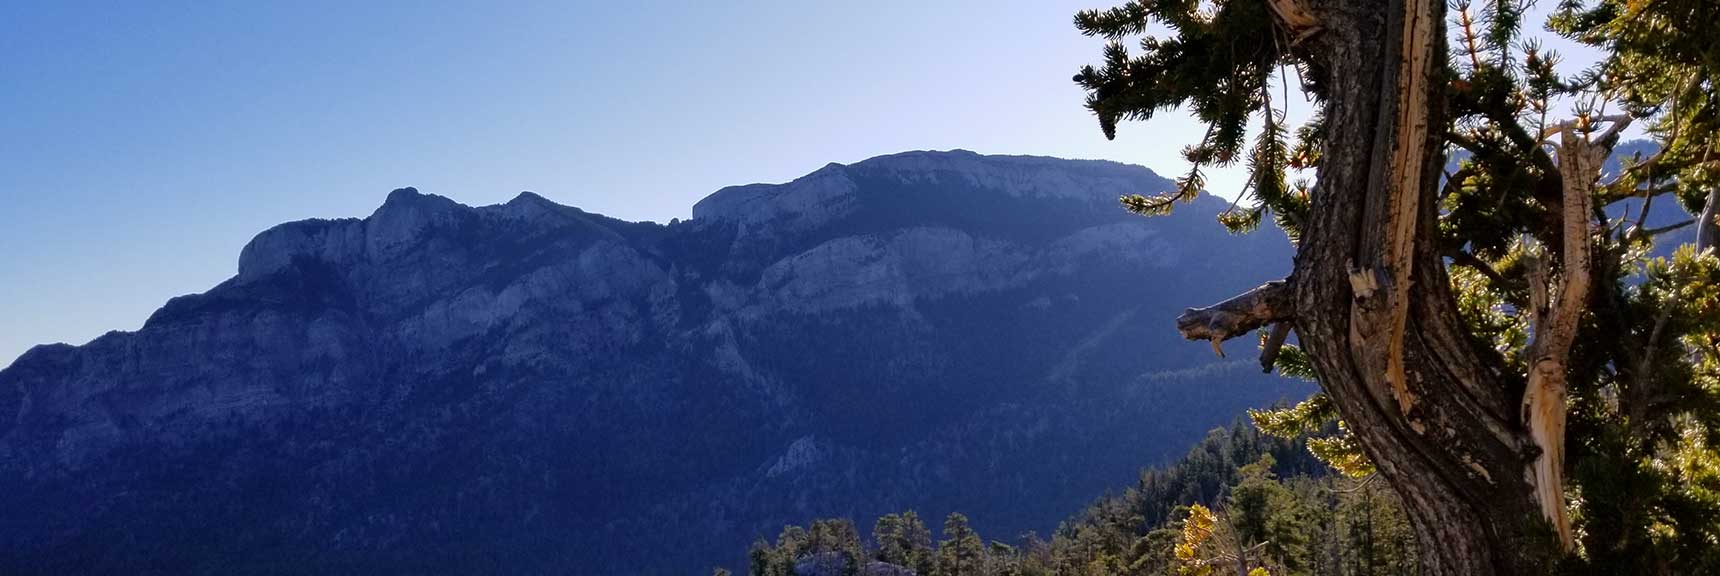 Breaking Out Into the Open, View of Mummy Mountain from the Bristlecone Pine Trail in Lee Canyon, Mt. Charleston Wilderness, Nevada